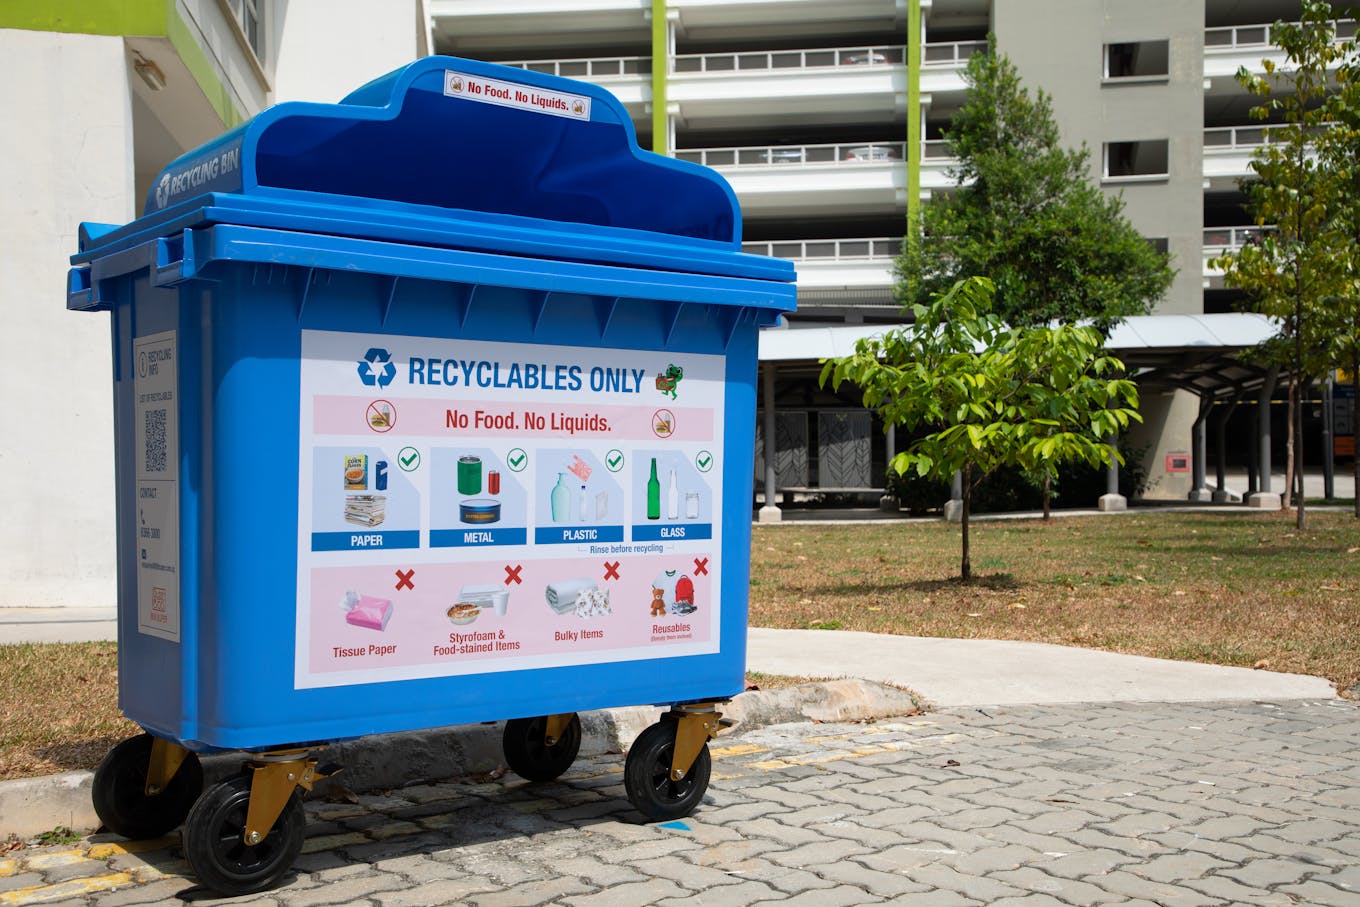 New blue recycling bins in Singapore.